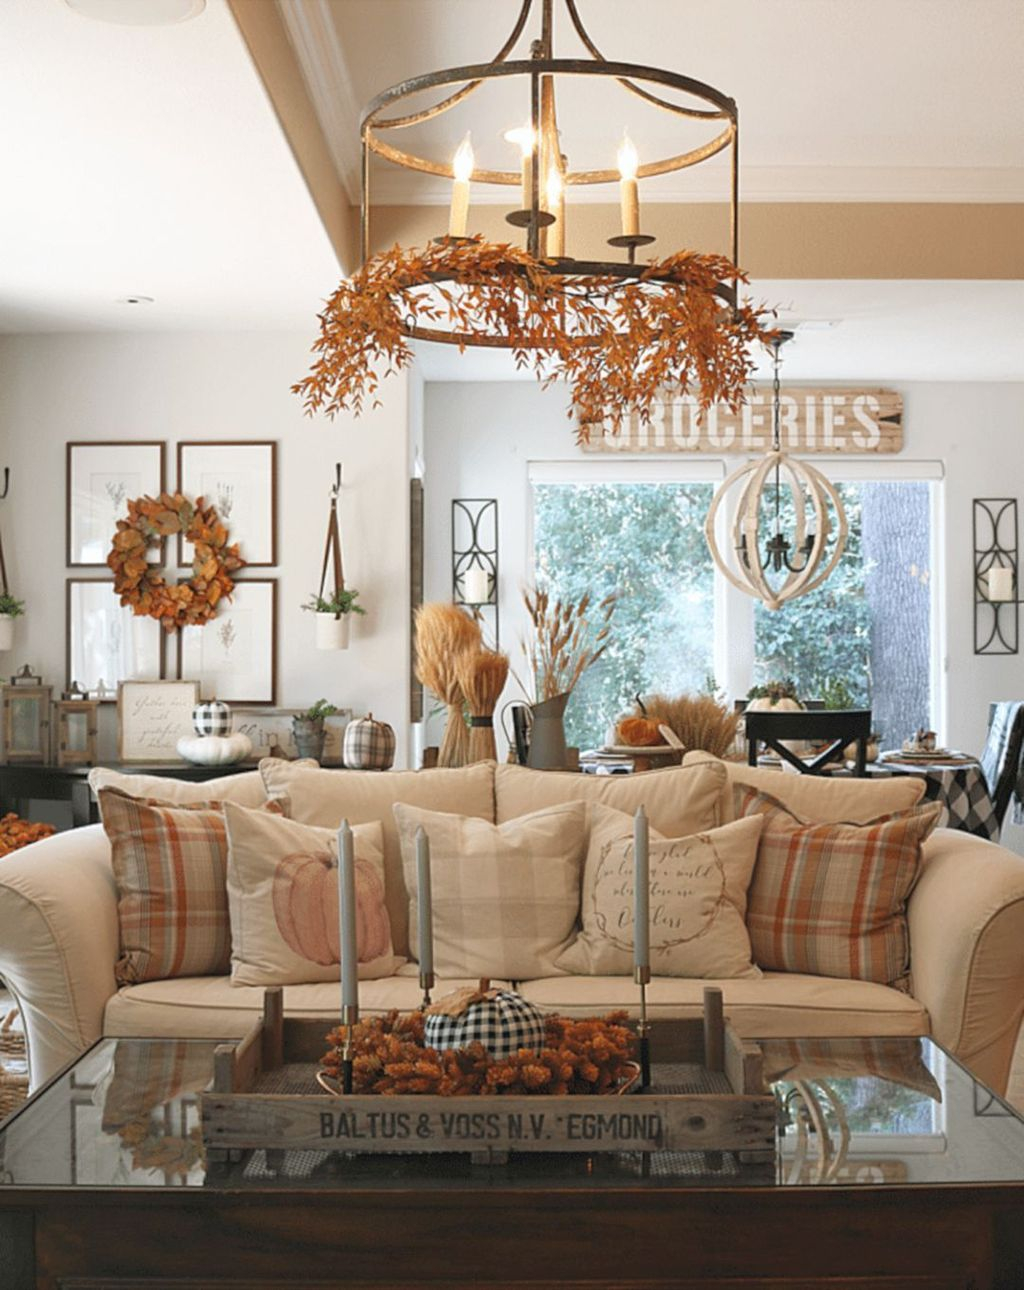 Fabulous Interior Design Ideas For Fall And Winter To Try Now30